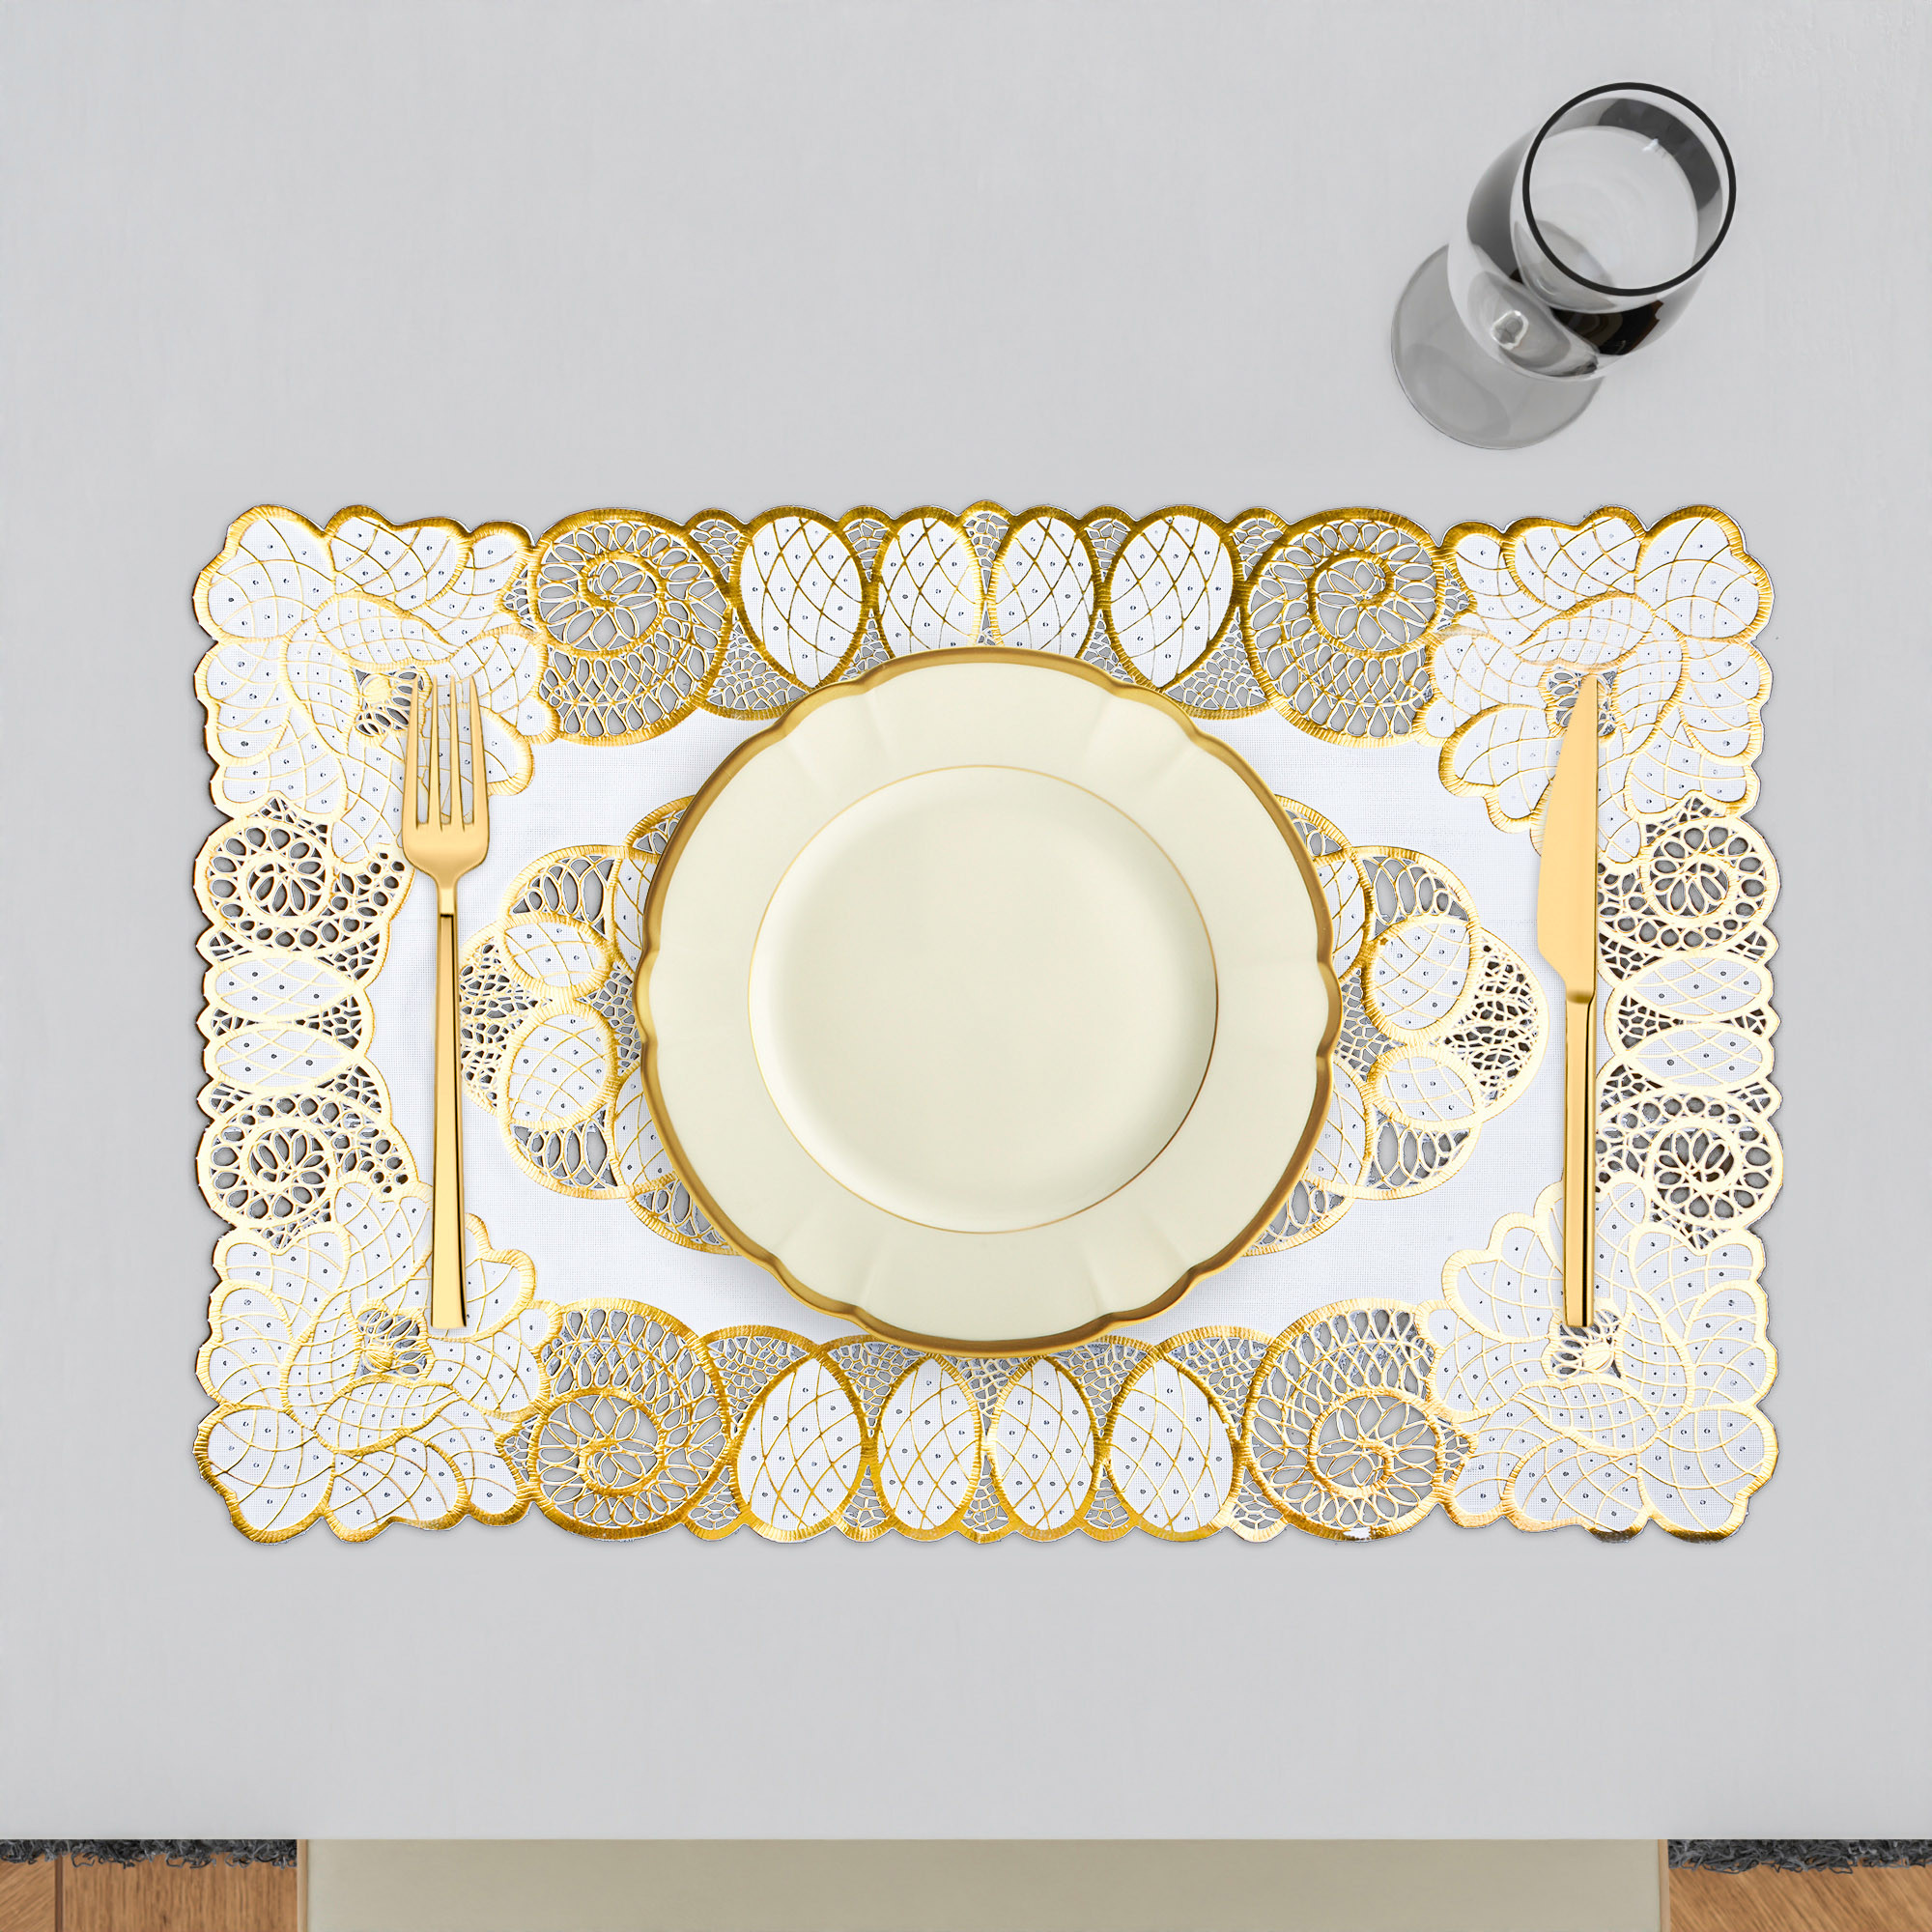 Kuber Industries Placemat | Placemats for Dining Room | Designer Table Mat Set | Placemats for Kitchen | Side Placemats | Table Placemat Set | Medium | 4 Piece Set | 14x20 | Golden